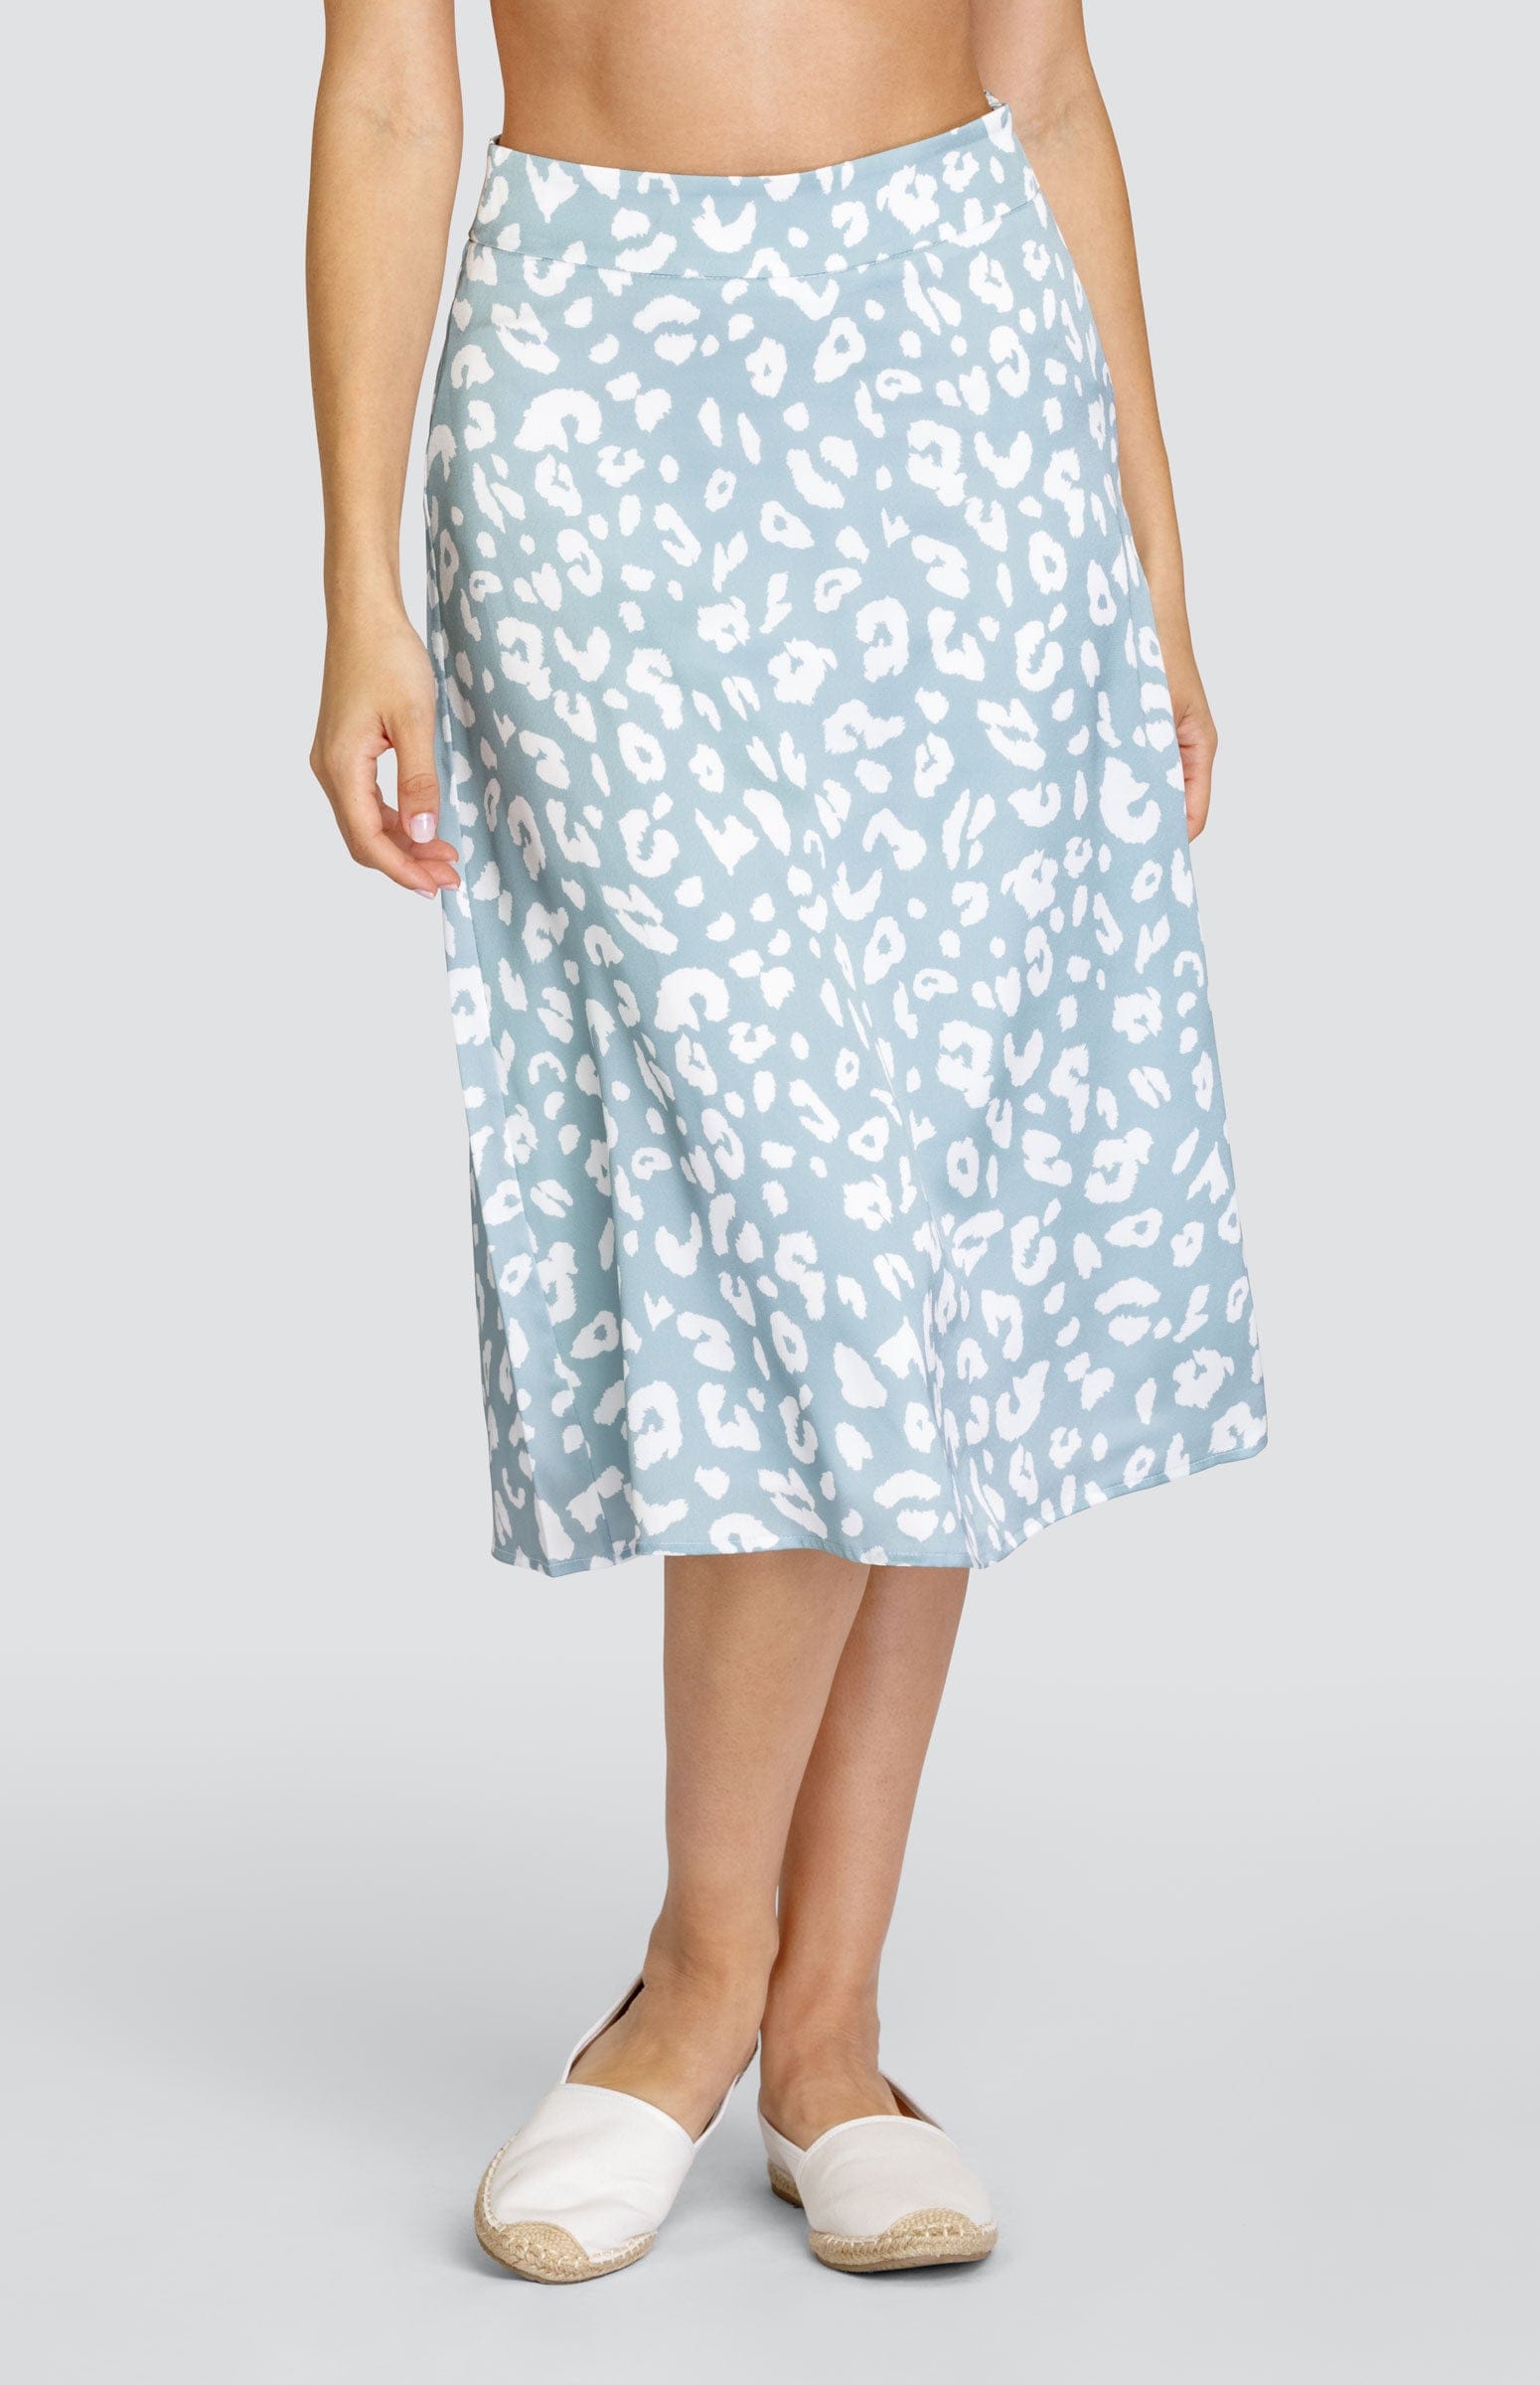 Winslow 28" Skirt - Spotted - FINAL SALE